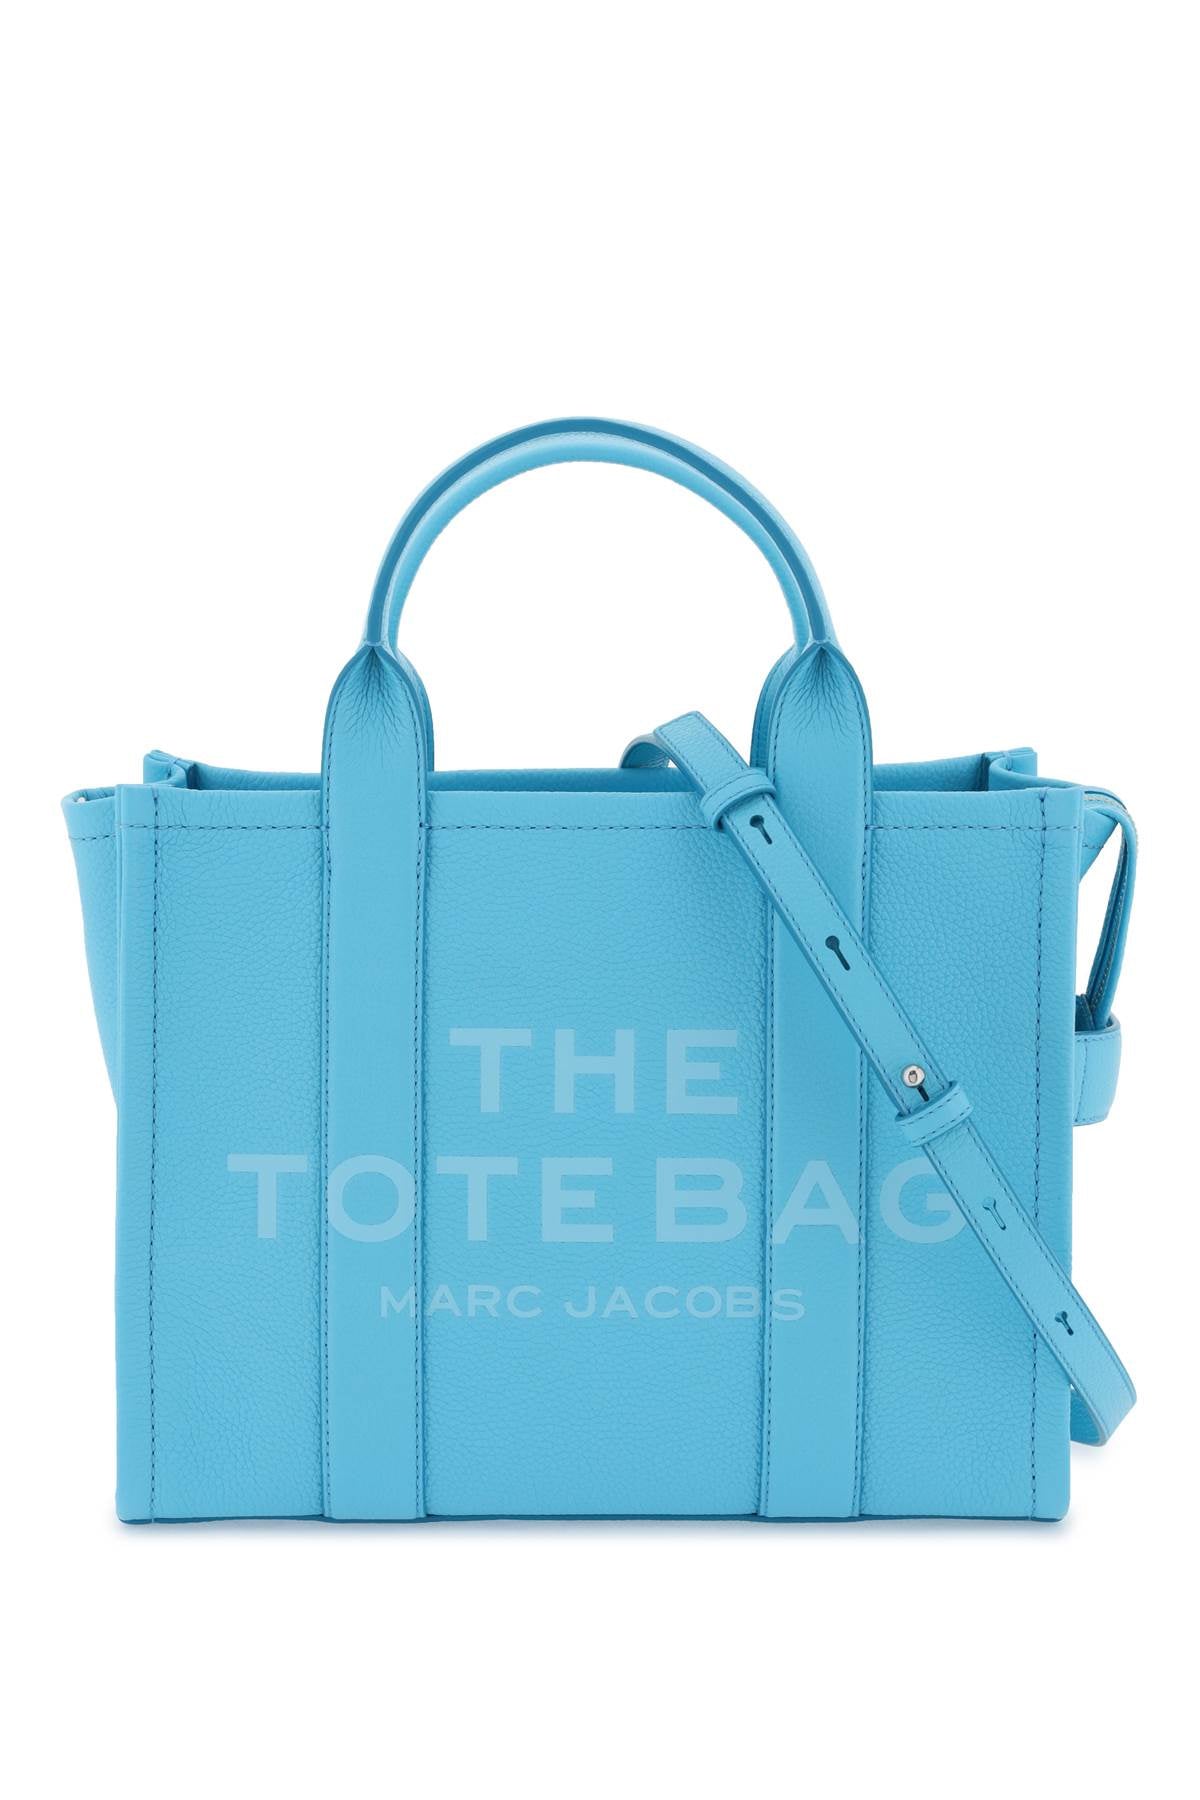 LIGHT BLUE MARC JACOBS MARC JACOBS 'THE LEATHER SMALL TOTE BAG'  (H004L01PF21)